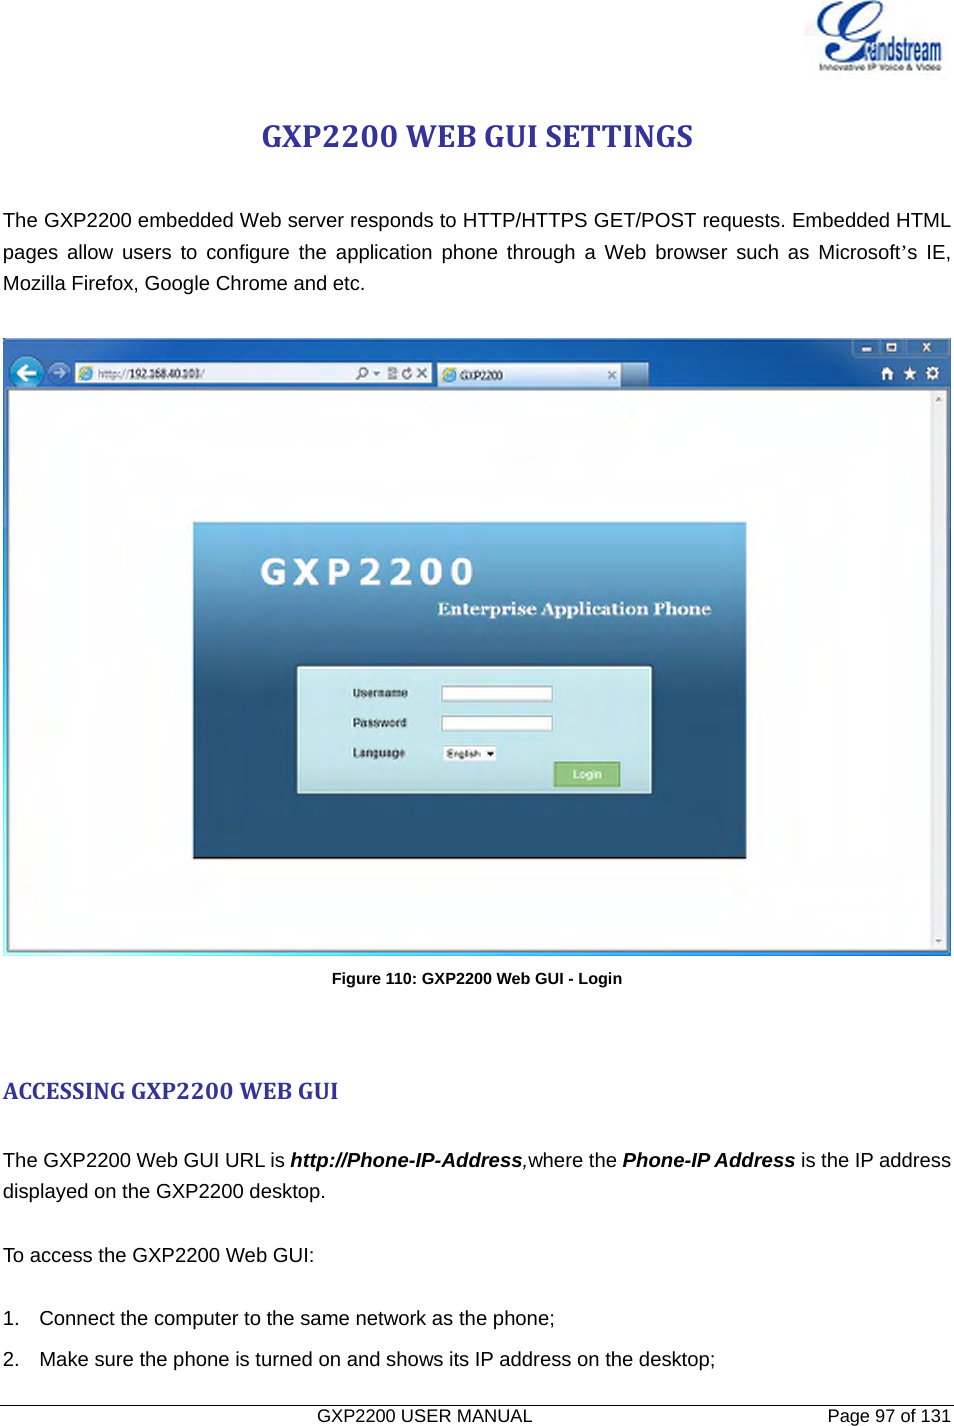   GXP2200 USER MANUAL       Page 97 of 131                                  GXP2200WEBGUISETTINGS The GXP2200 embedded Web server responds to HTTP/HTTPS GET/POST requests. Embedded HTML pages allow users to configure the application phone through a Web browser such as Microsoft’s IE,  Mozilla Firefox, Google Chrome and etc.   Figure 110: GXP2200 Web GUI - Login ACCESSINGGXP2200WEBGUI The GXP2200 Web GUI URL is http://Phone-IP-Address,where the Phone-IP Address is the IP address displayed on the GXP2200 desktop.  To access the GXP2200 Web GUI:  1.  Connect the computer to the same network as the phone; 2.  Make sure the phone is turned on and shows its IP address on the desktop; 